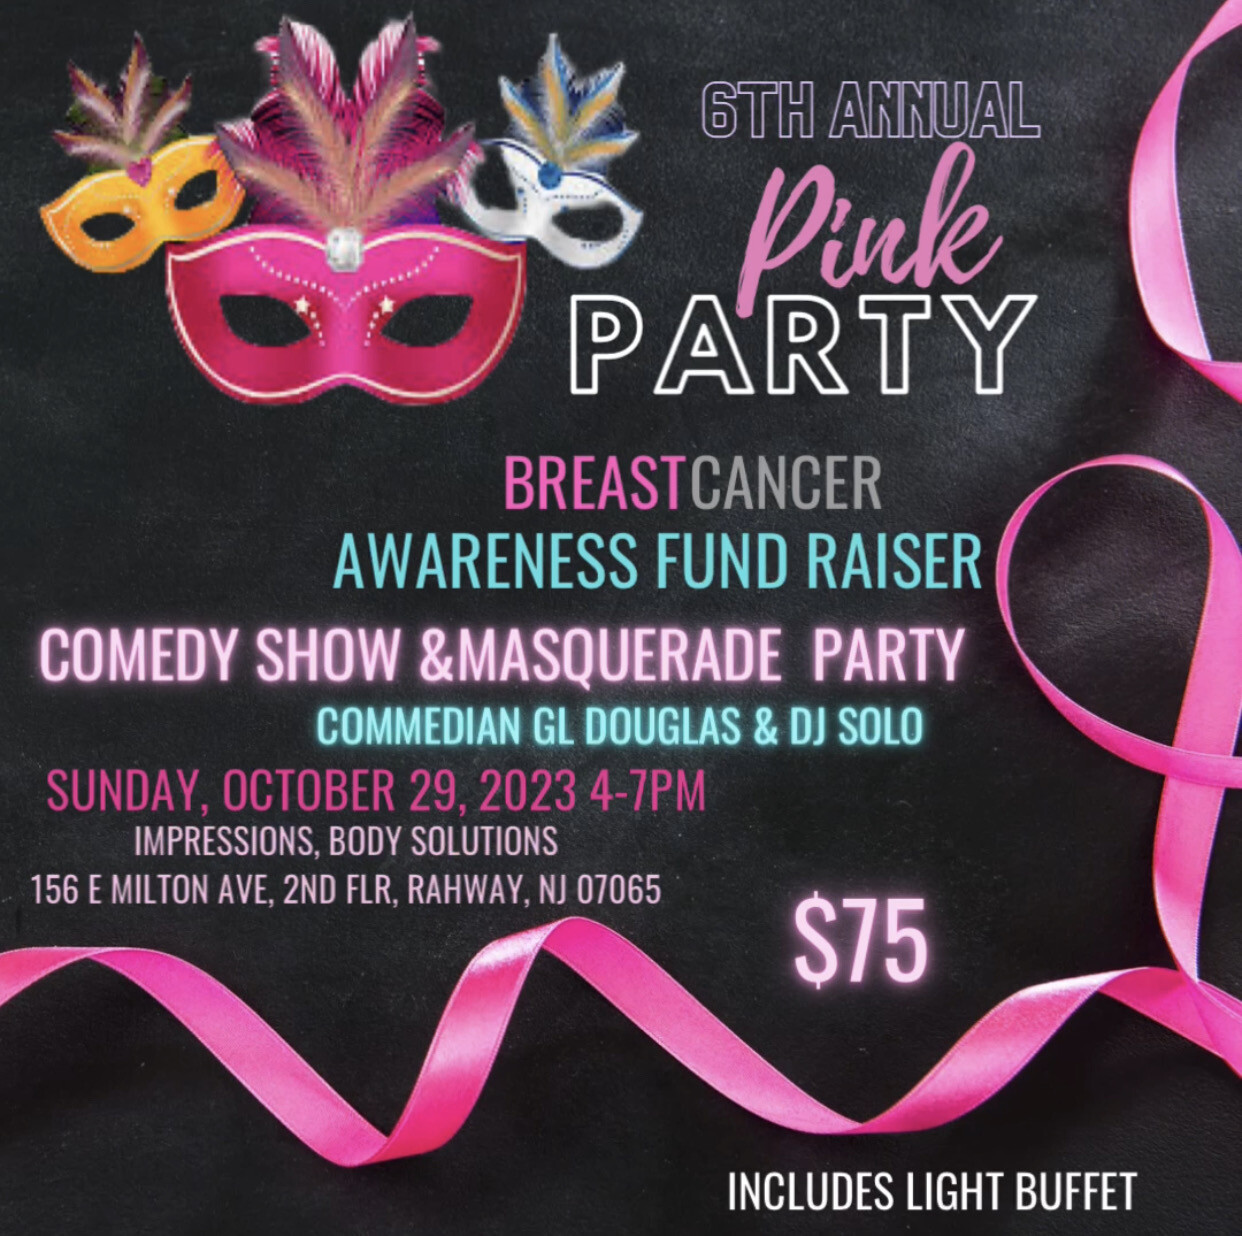 6th Annual PINK PARTY, Breast Cancer Awareness Fund raiser